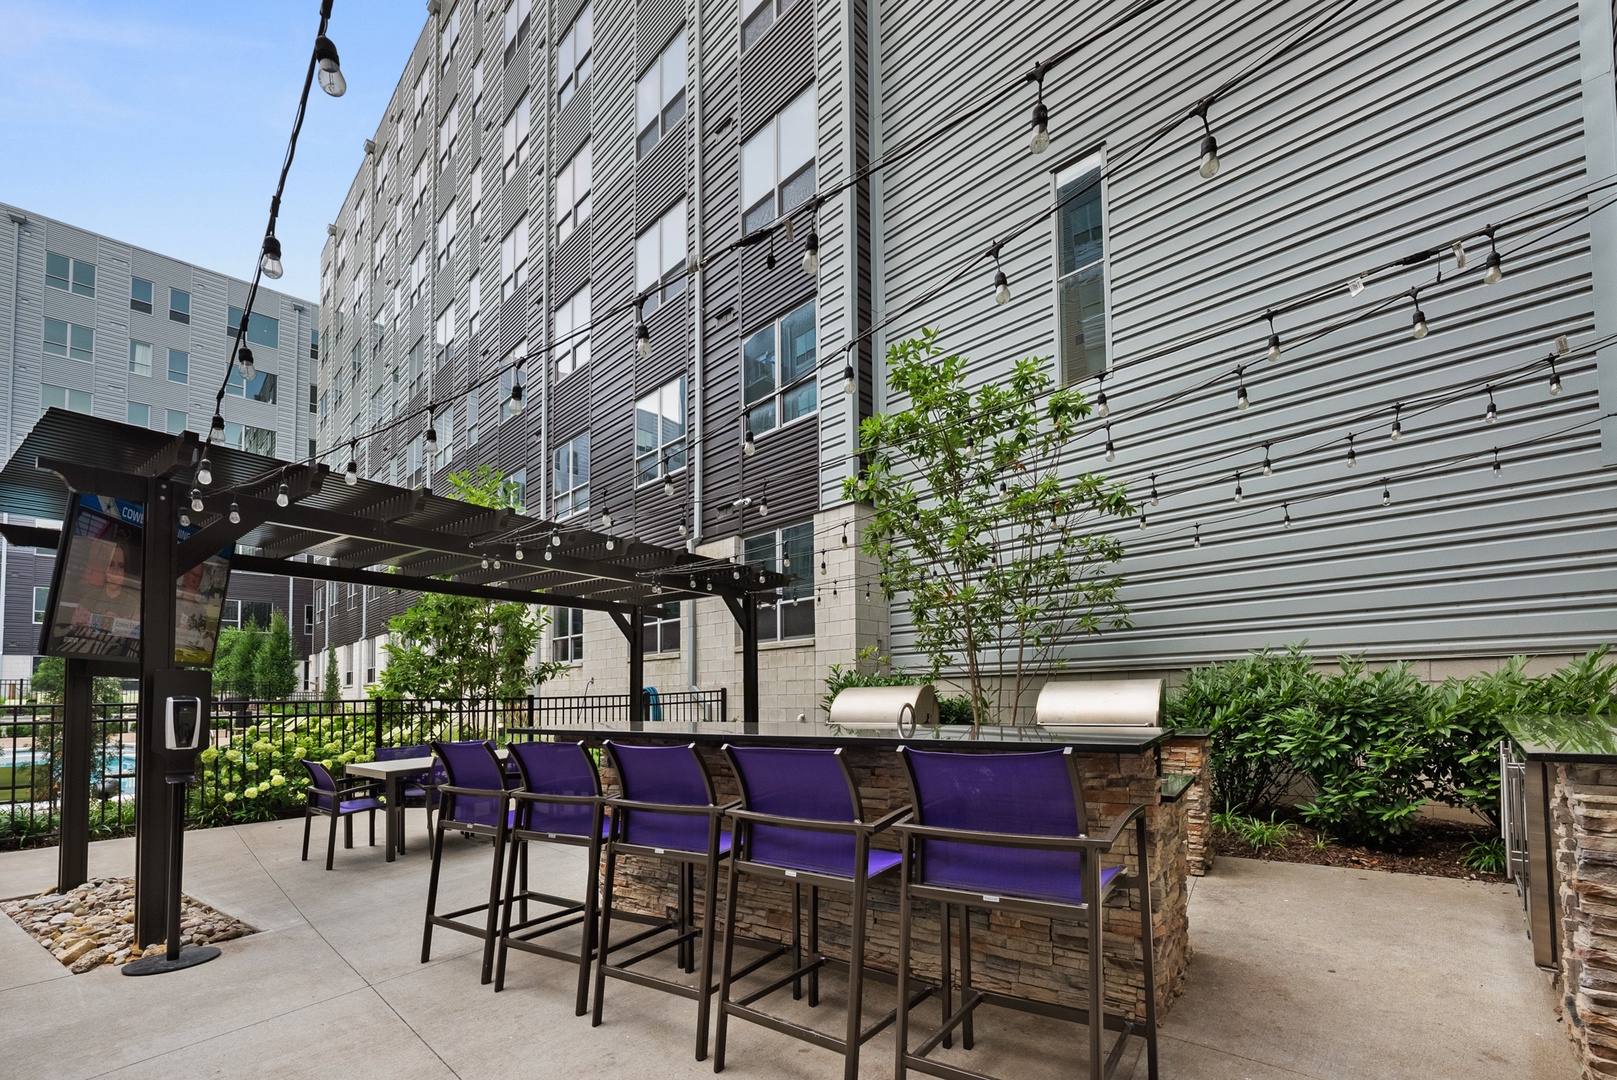 Your ultimate urban oasis awaits at The EDGE on 4th - where work and play seamlessly converge